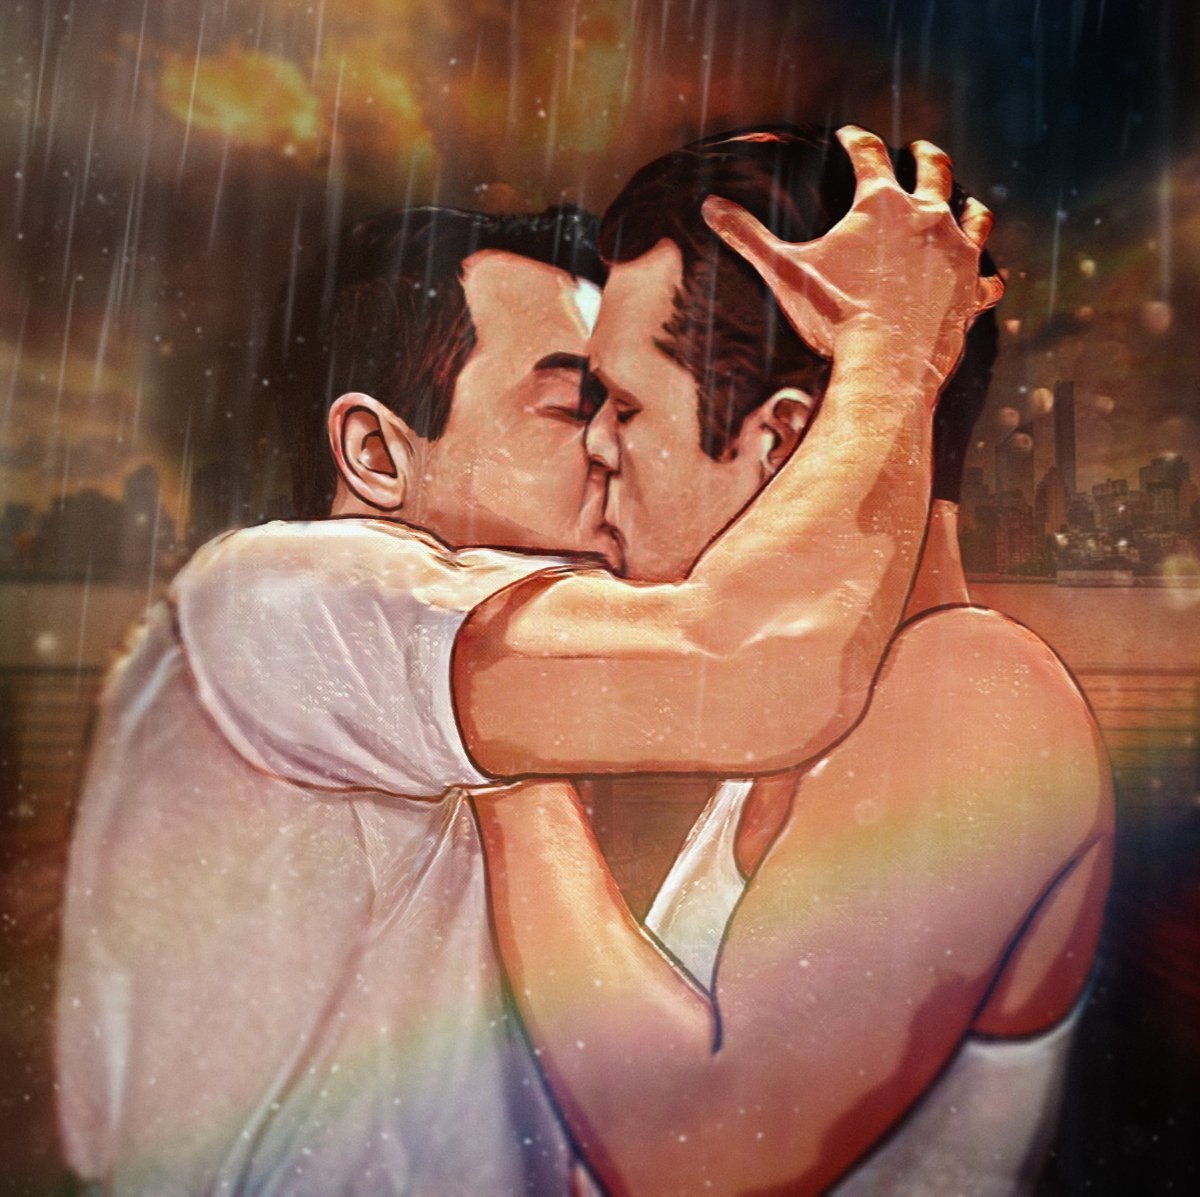 Sex kingsgallavich:Art by Dina Morozz pictures